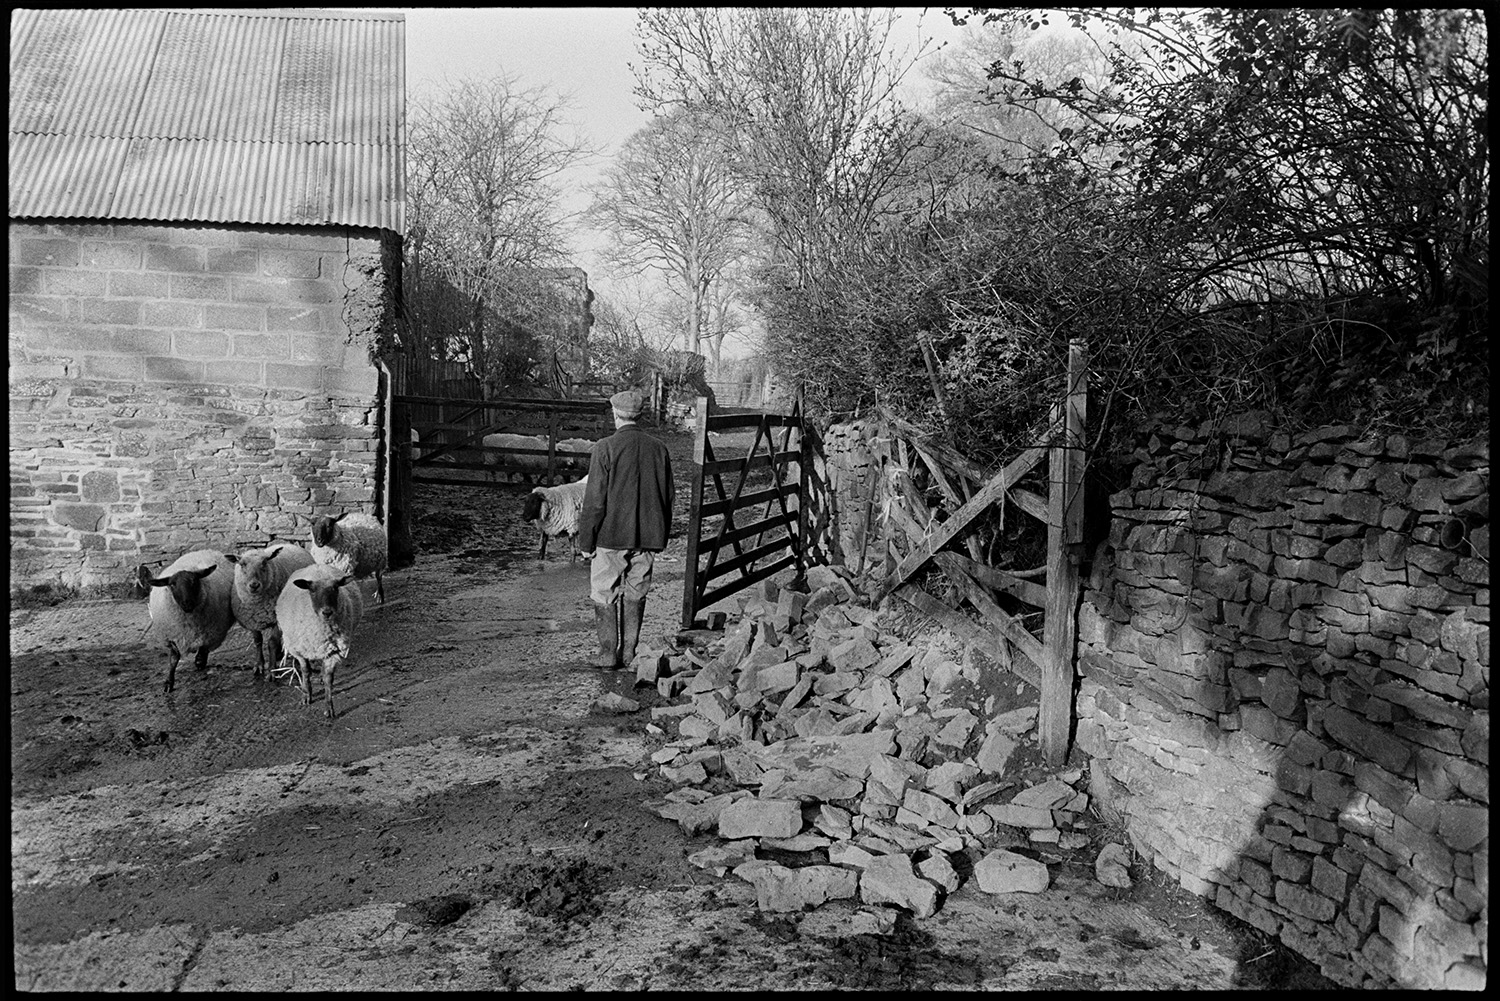 Farmyard, cattle, sheep, implements. 
[Alf Pugsley stood by a wooden gate waiting for sheep to walk into the farmyard, past a barn, at Lower Langham, Dolton. A pile of stone can be seen by the gateway.]